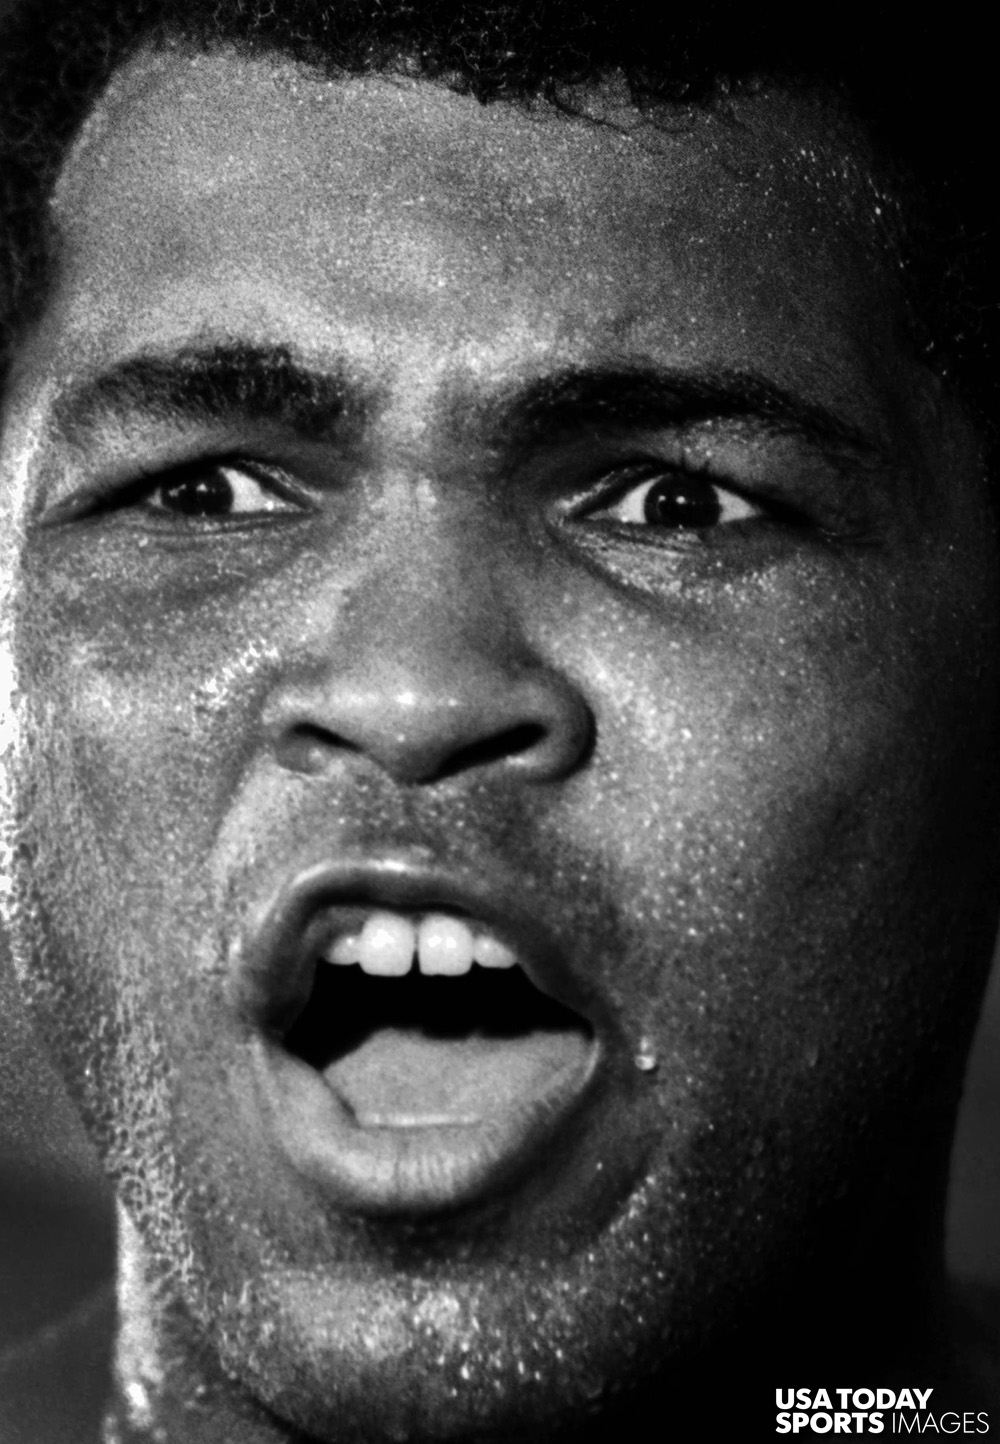 (Muhammad Ali reacts during a training session at the 5th Street Gym in Miami Beach, Florida prior to his 1980 fight against Larry Holmes. // Credit: Robert Mayer, USA TODAY Sports)